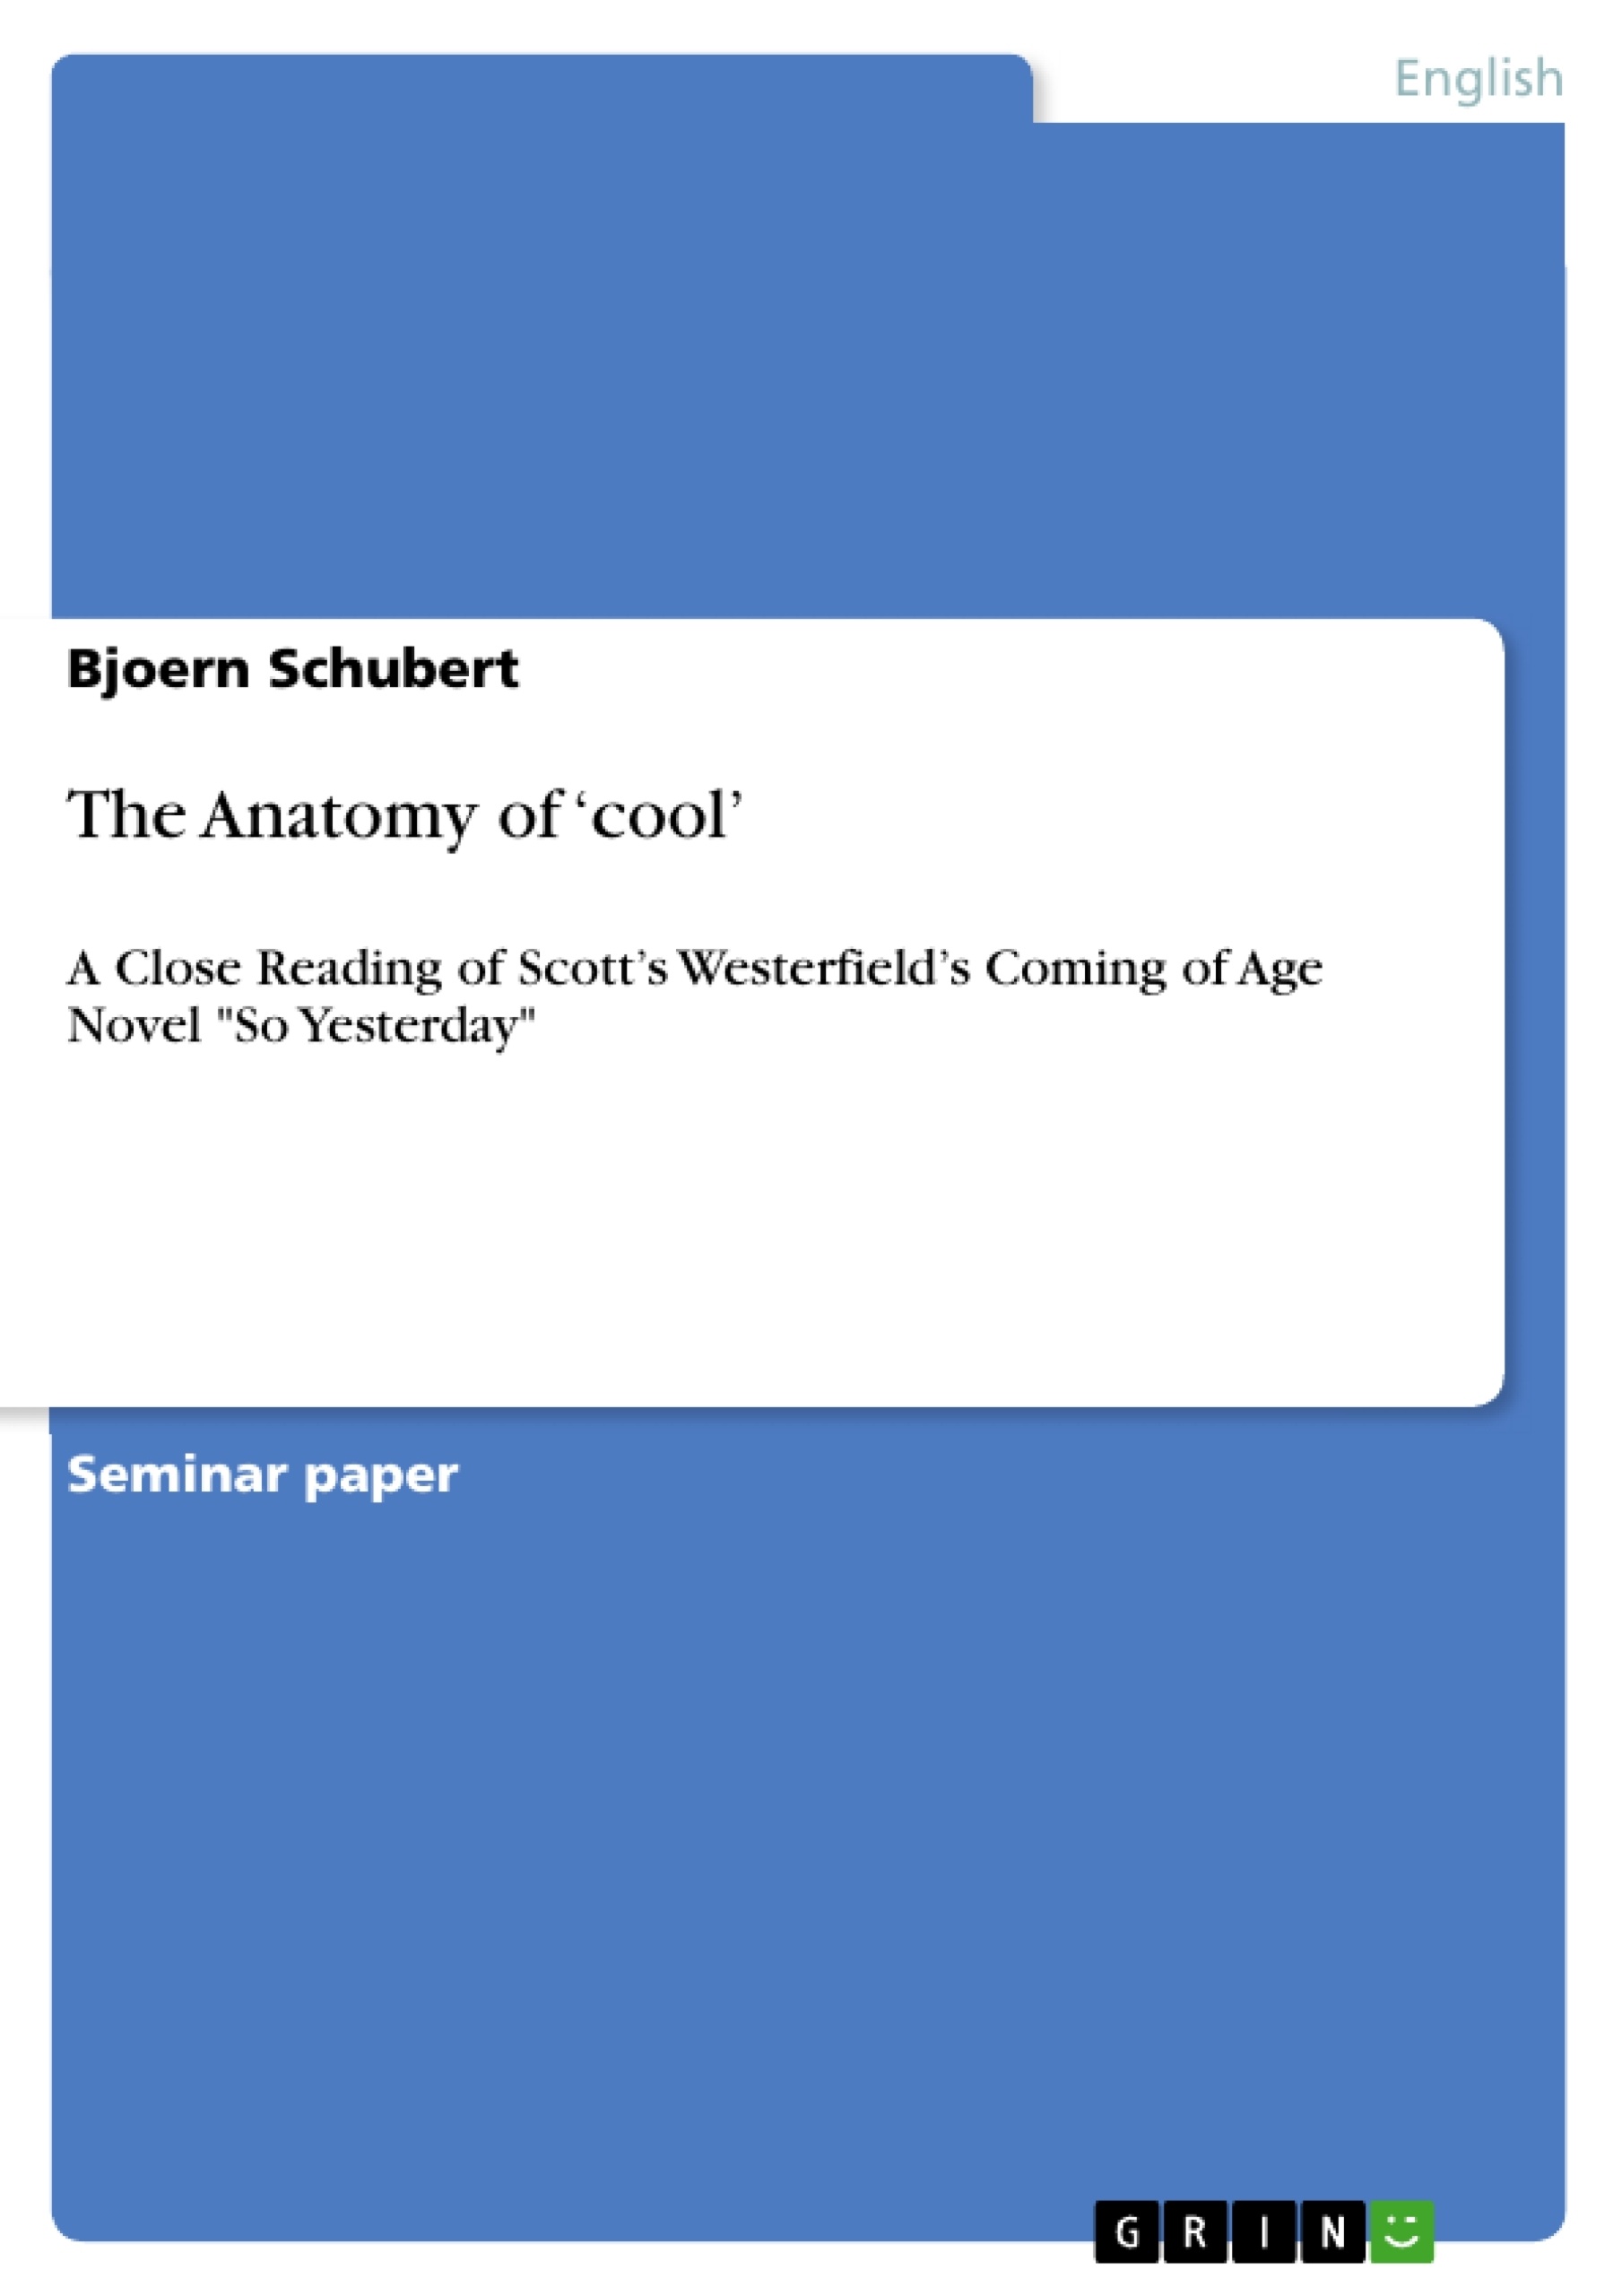 Titre: The Anatomy of ‘cool’